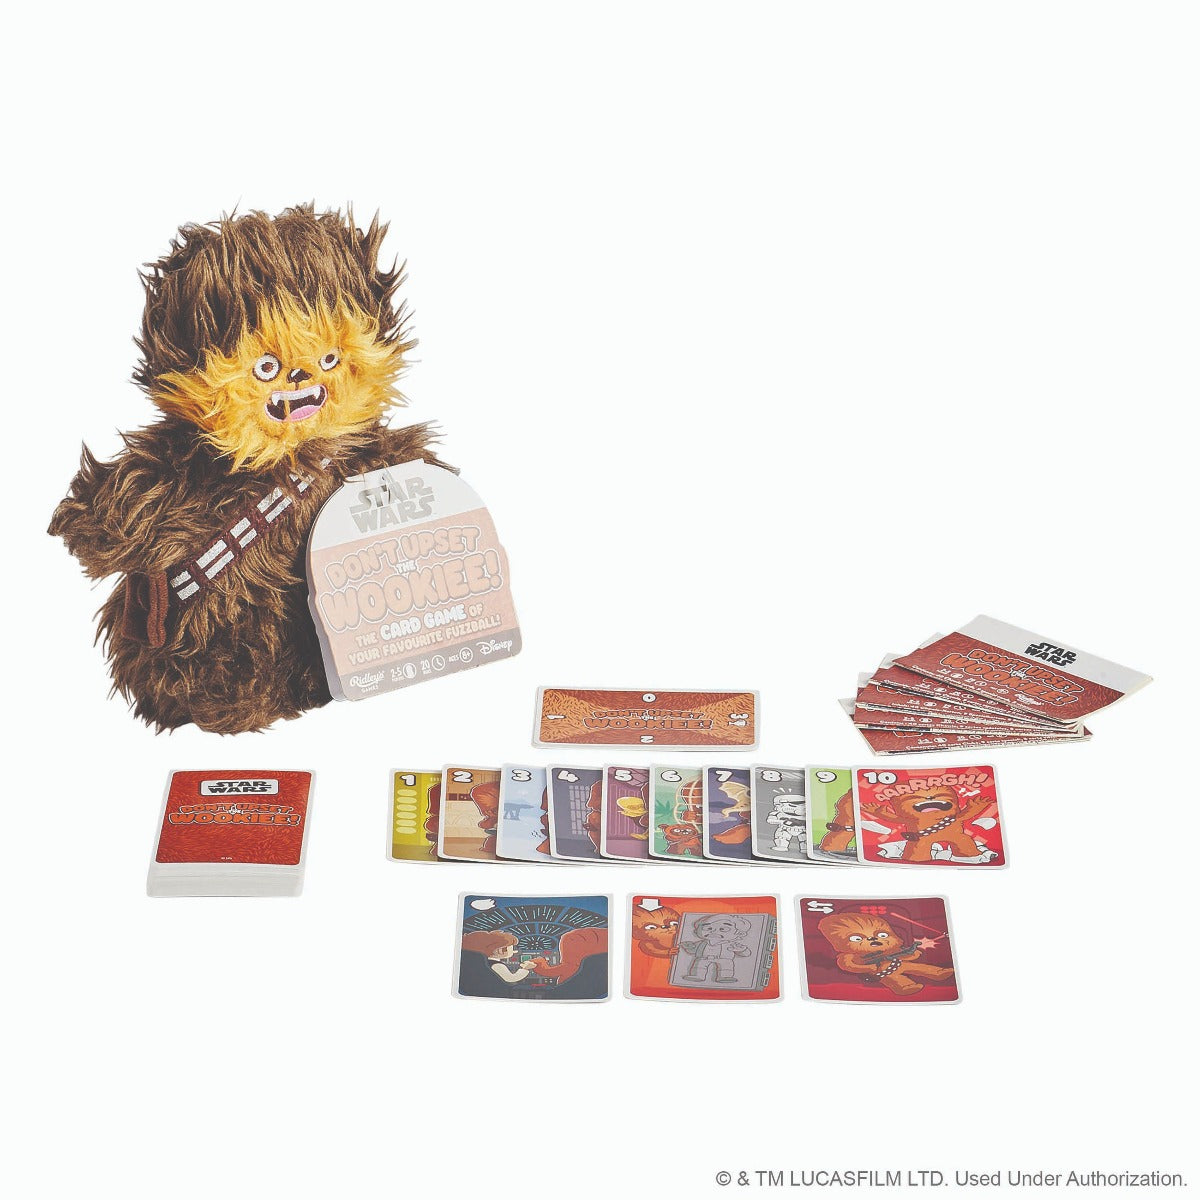 STAR WARS DON'T UPSET THE WOOKIE - Gifts R Us